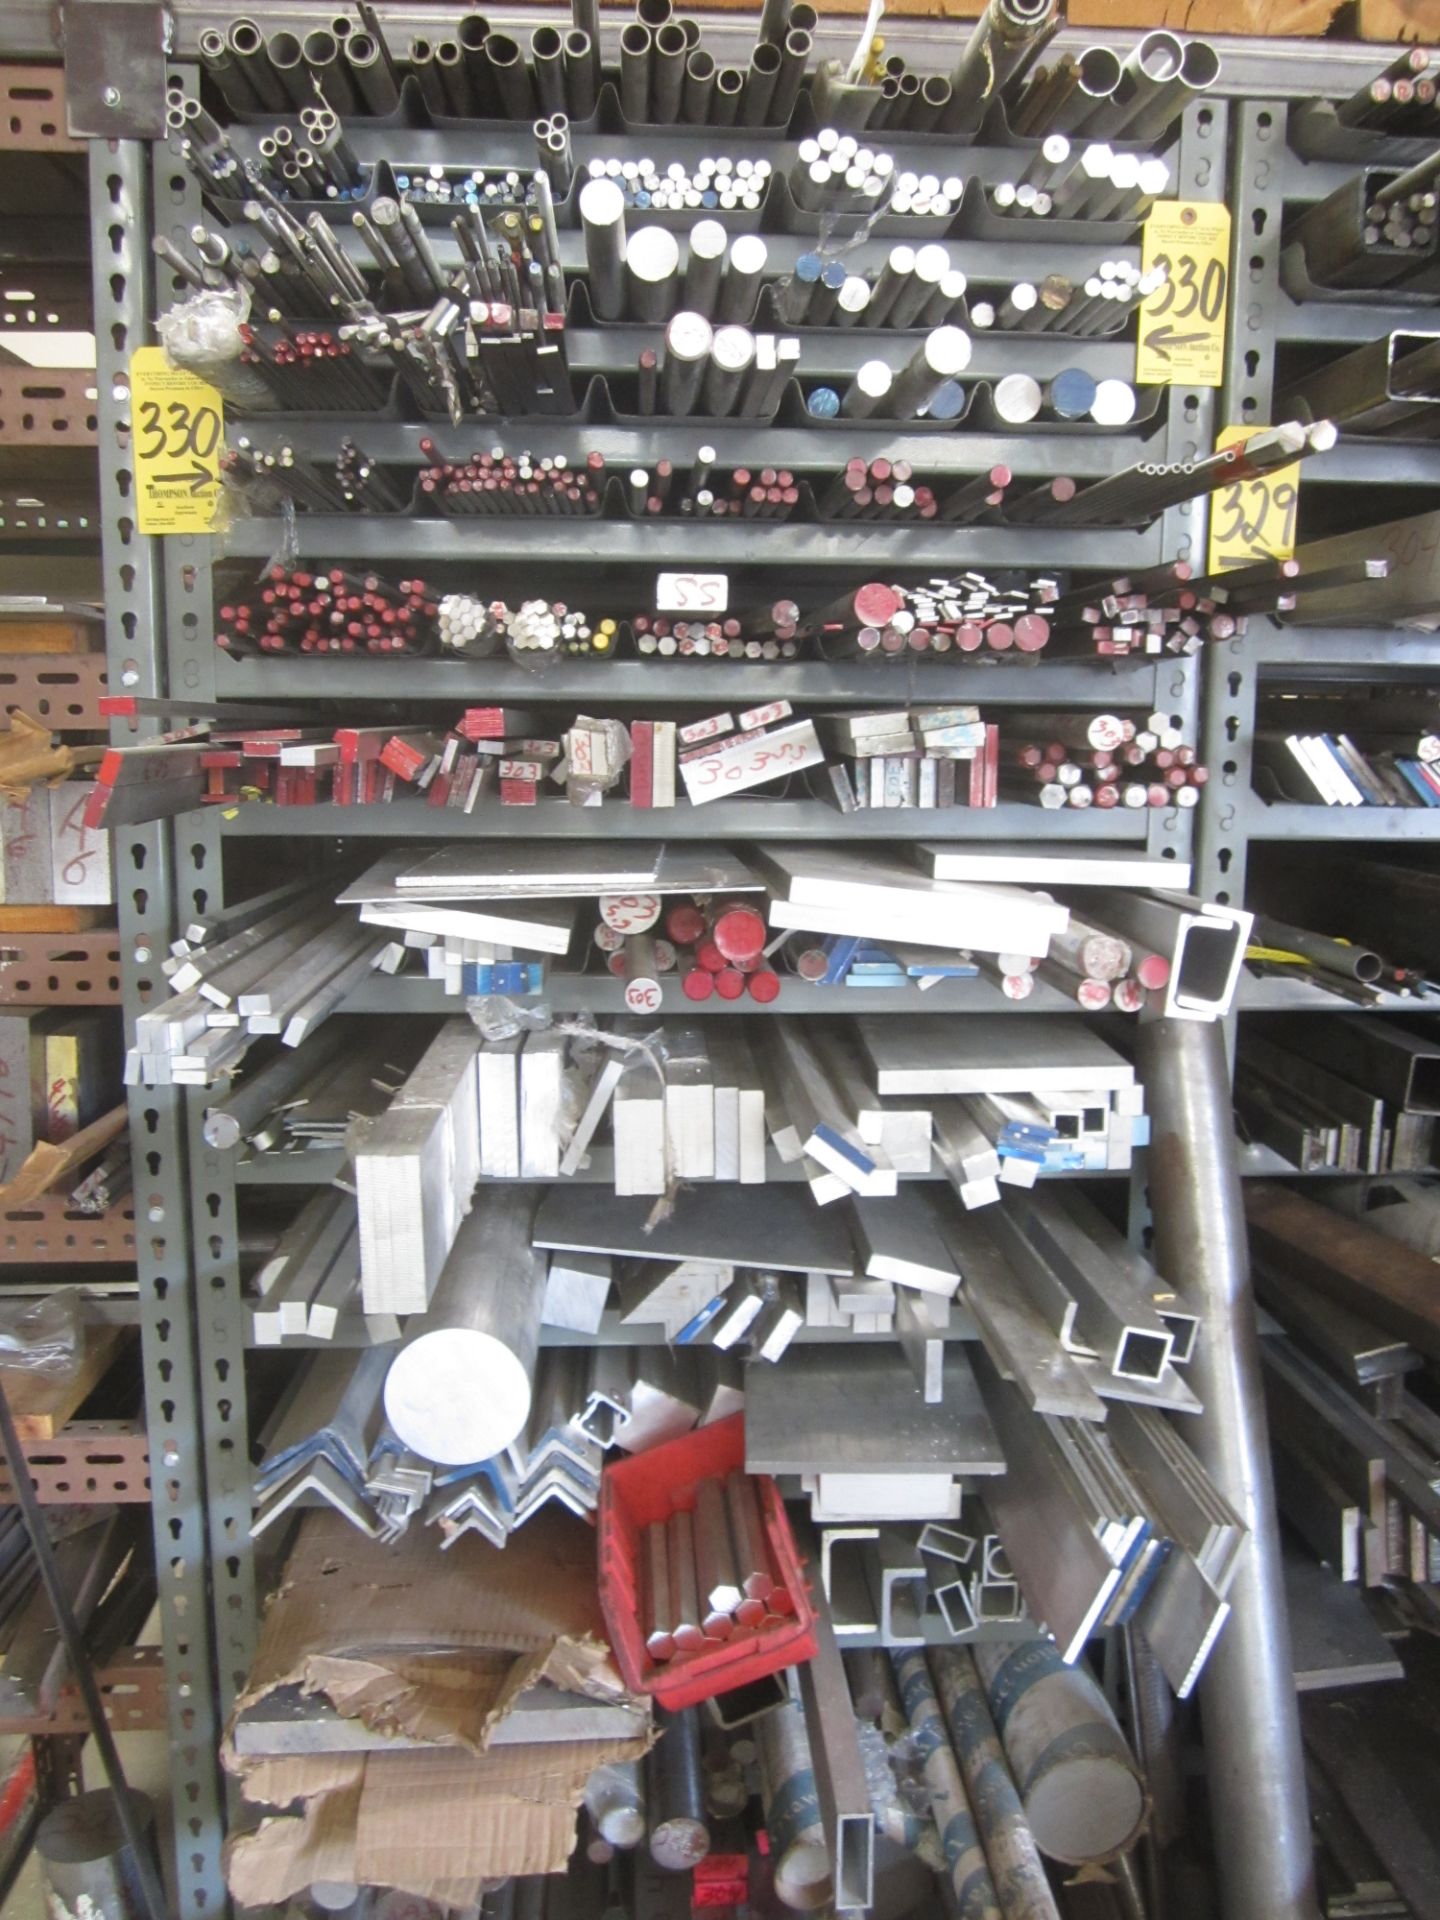 Storage Rack and Contents Including Aluminum and Stainless Steel Round Bar, Flat Bar, Tubing and